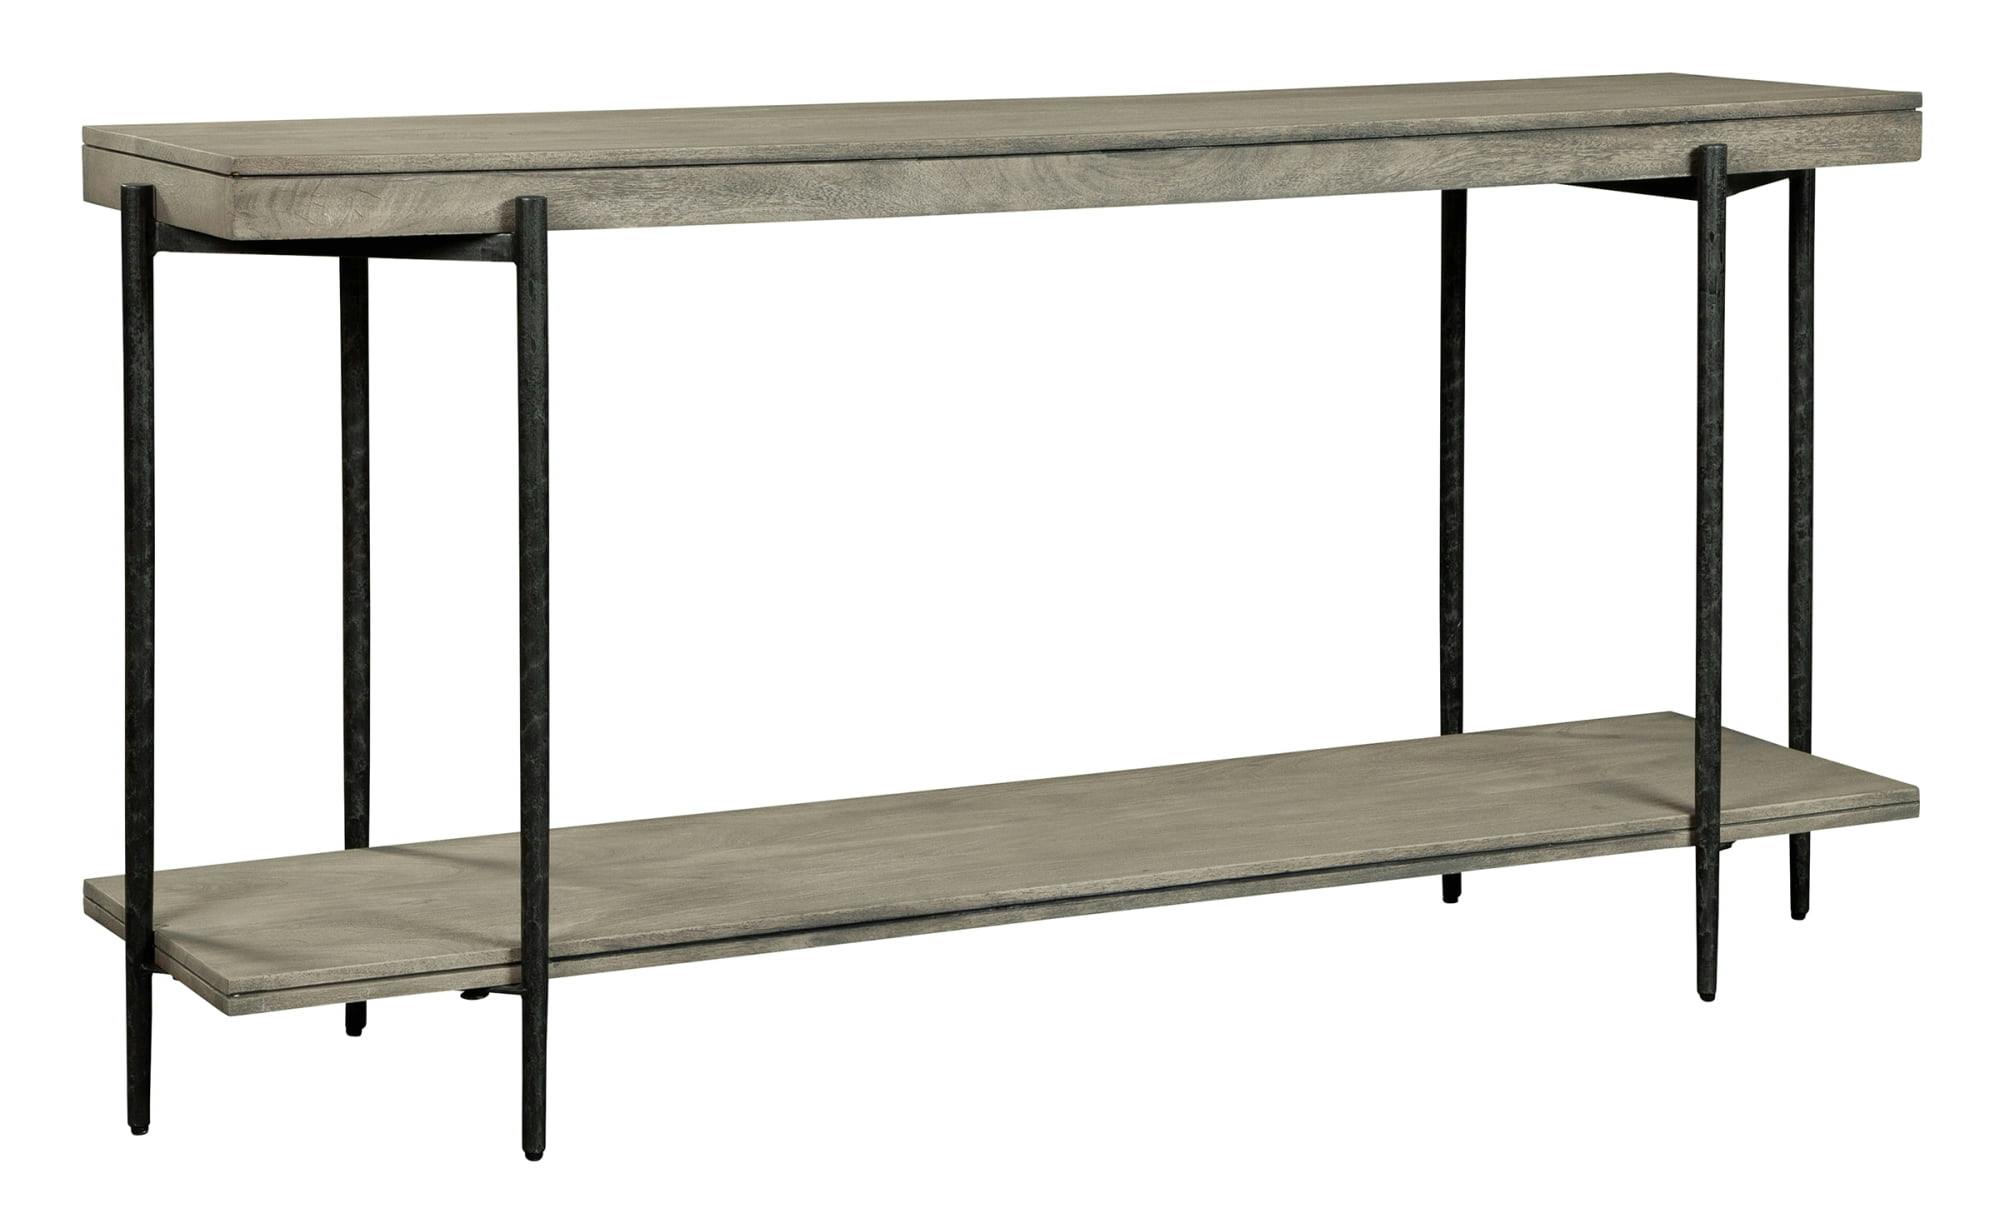 Transitional Rectangular Sofa Table with Storage in Black, Gray, and White